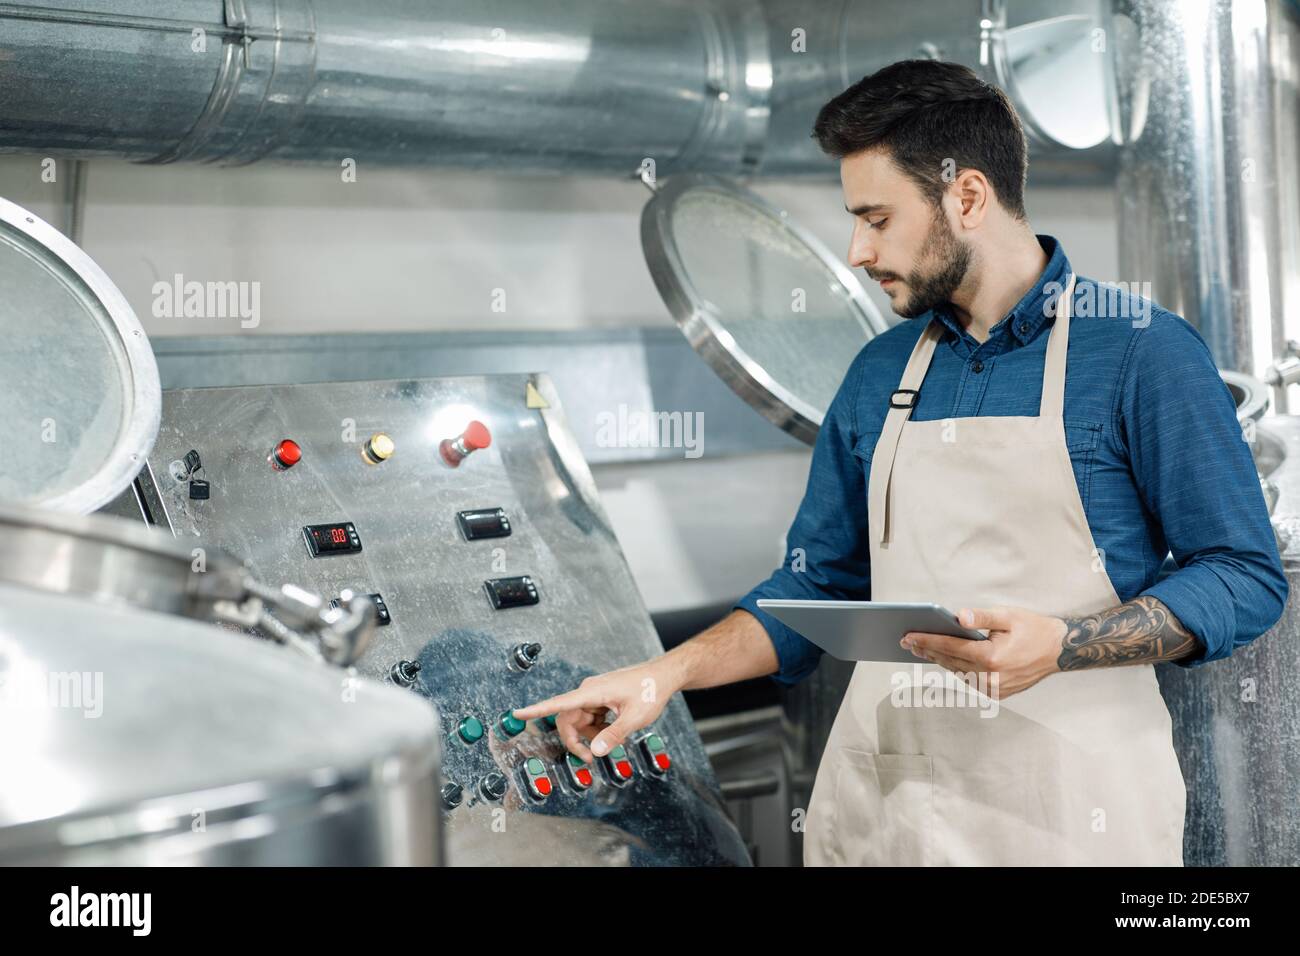 Inspection management control, production and bottling finish product Stock Photo